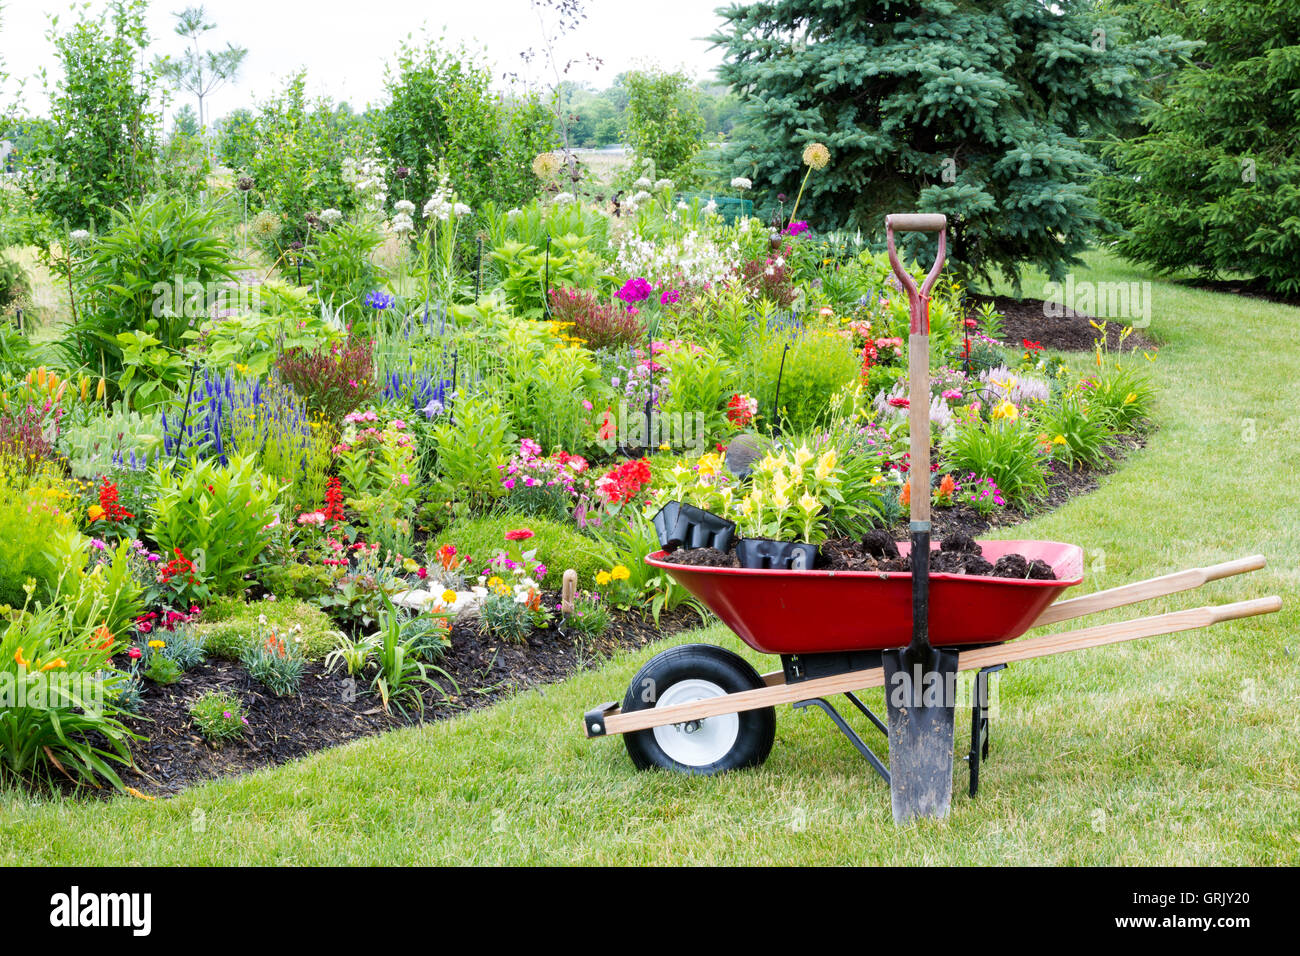 Work being done in the yard landscaping the garden with a red wheelbarrow standing on a manicured lawn alongside a new flowerbed Stock Photo